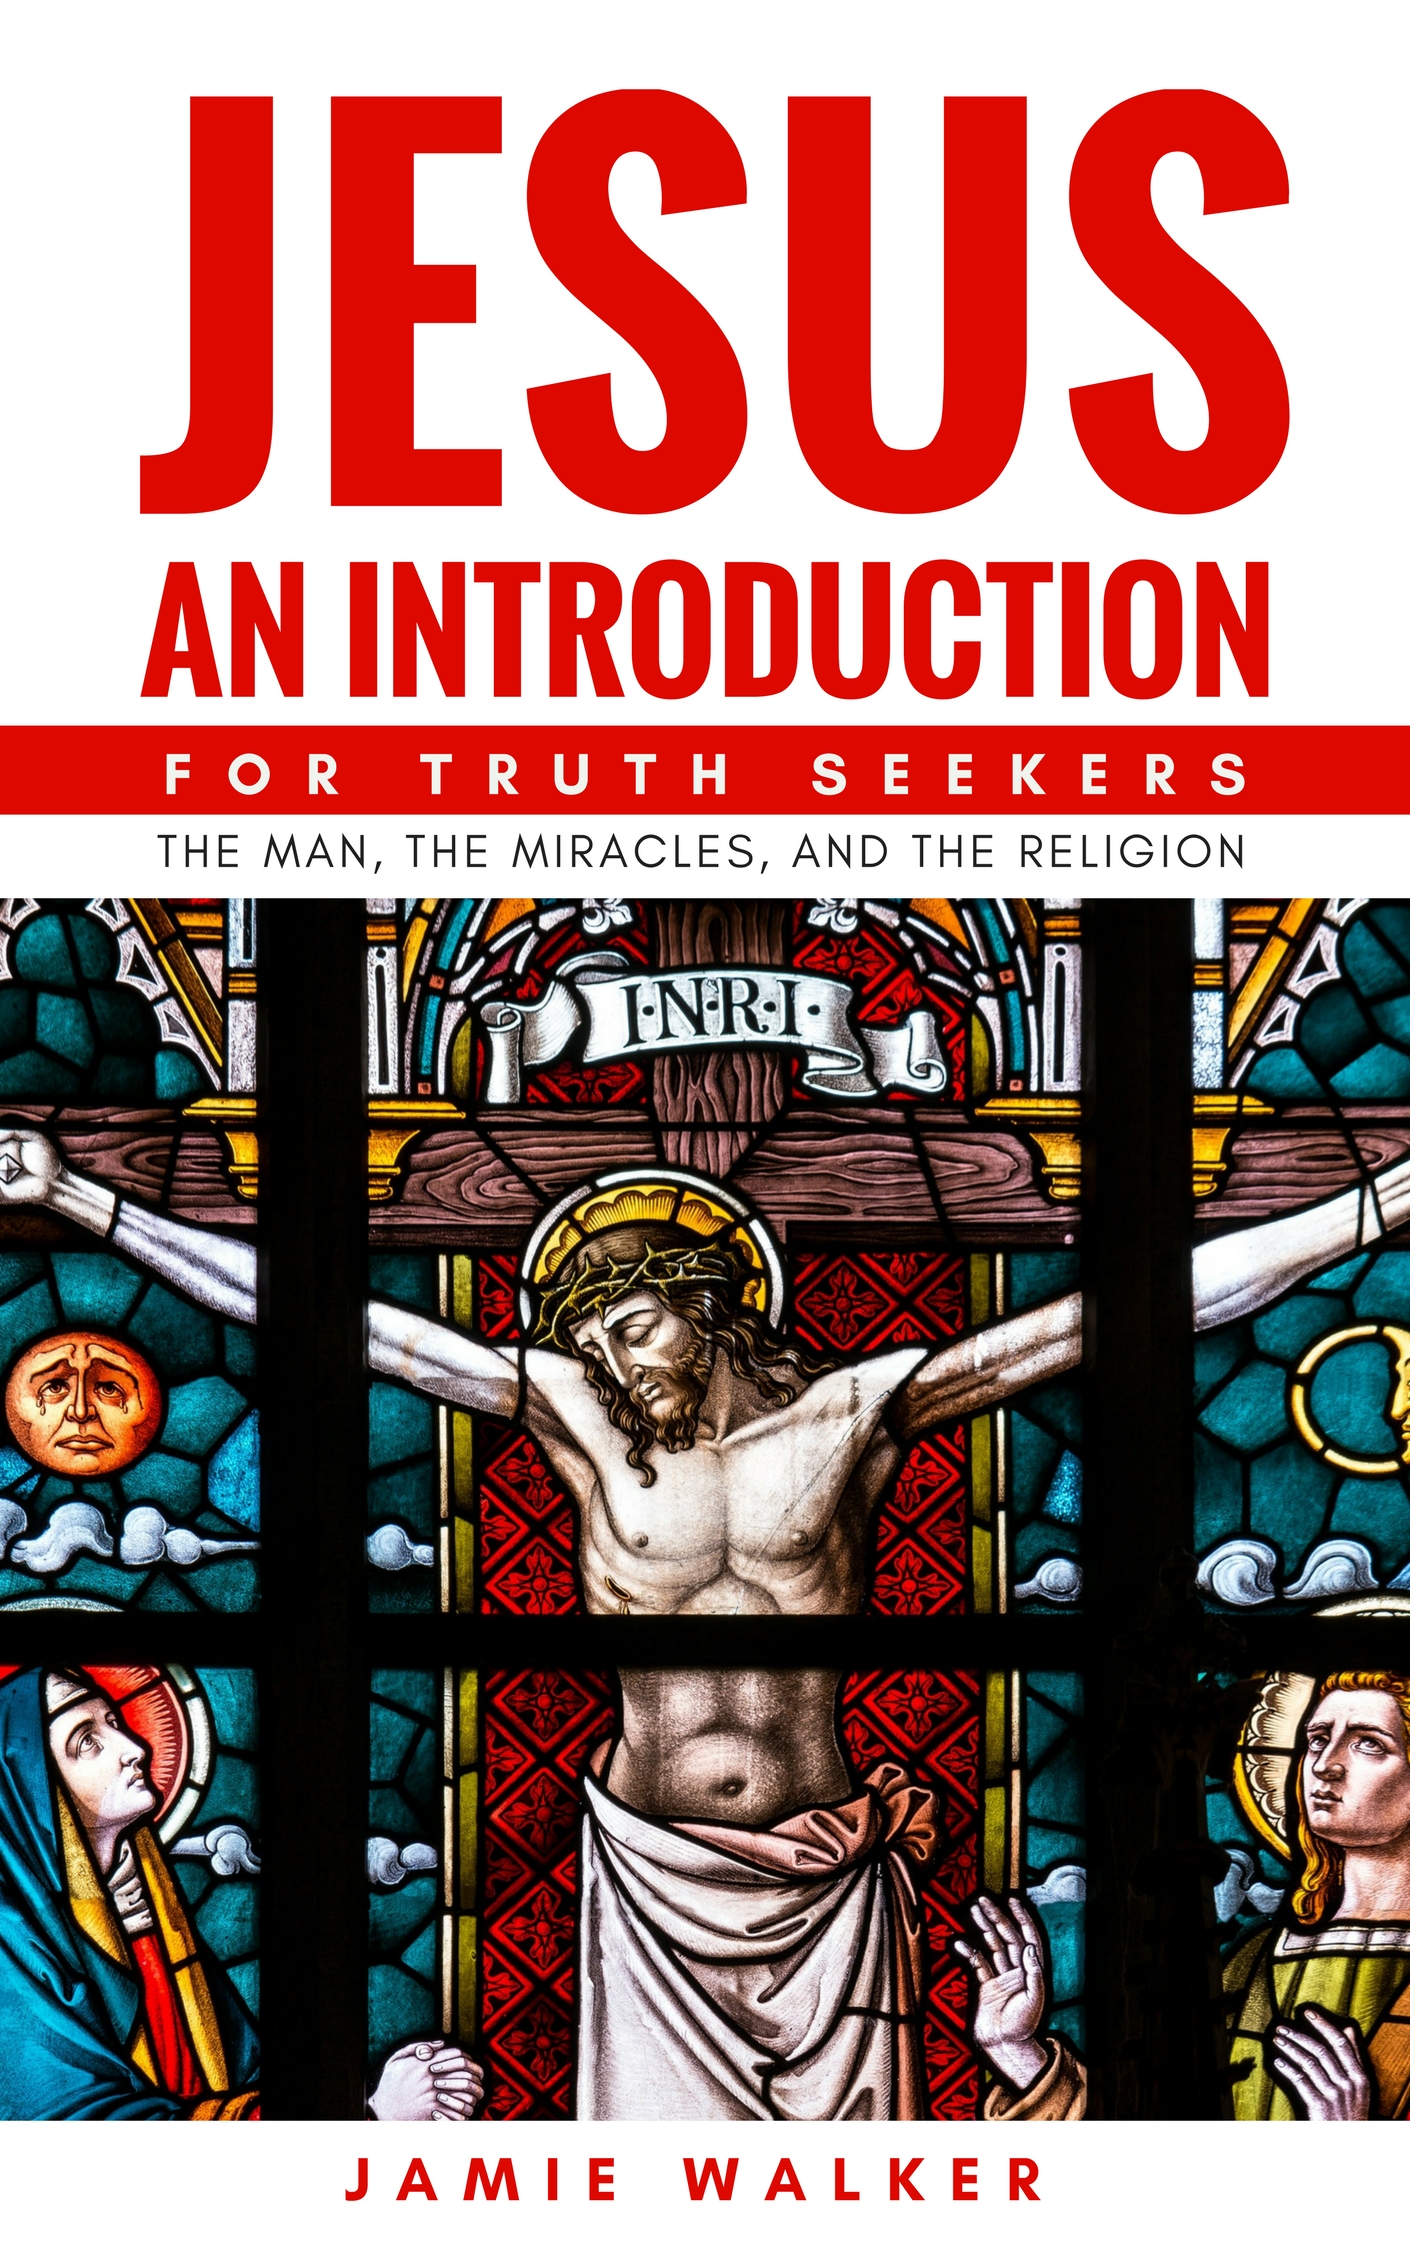 FREE: Jesus An Introduction For Truth Seekers: The Man, The Miracles and The Ministry by Jamie Walker